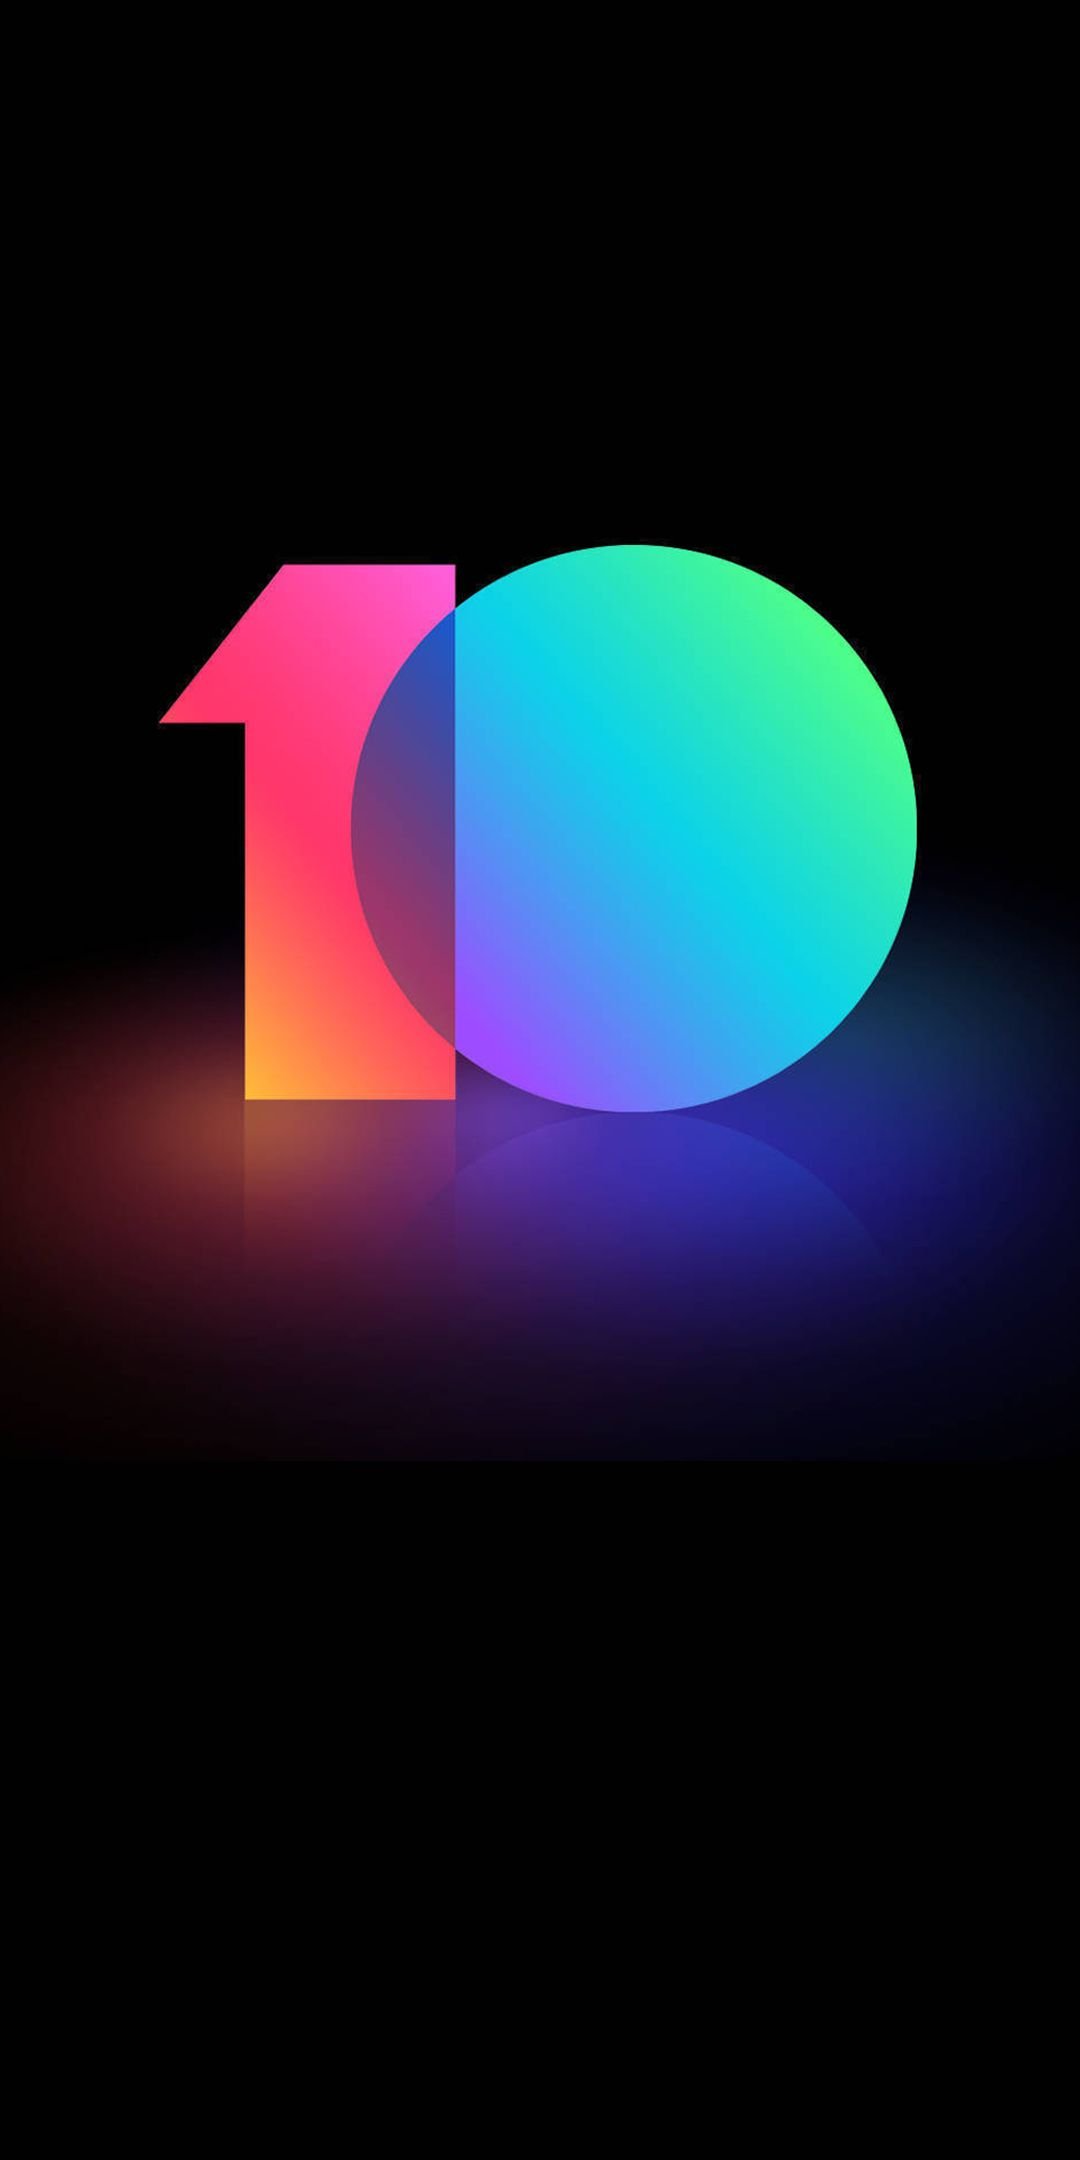 Download Miui 10 Wallpapers - Android 10 Wallpaper Hd , HD Wallpaper & Backgrounds